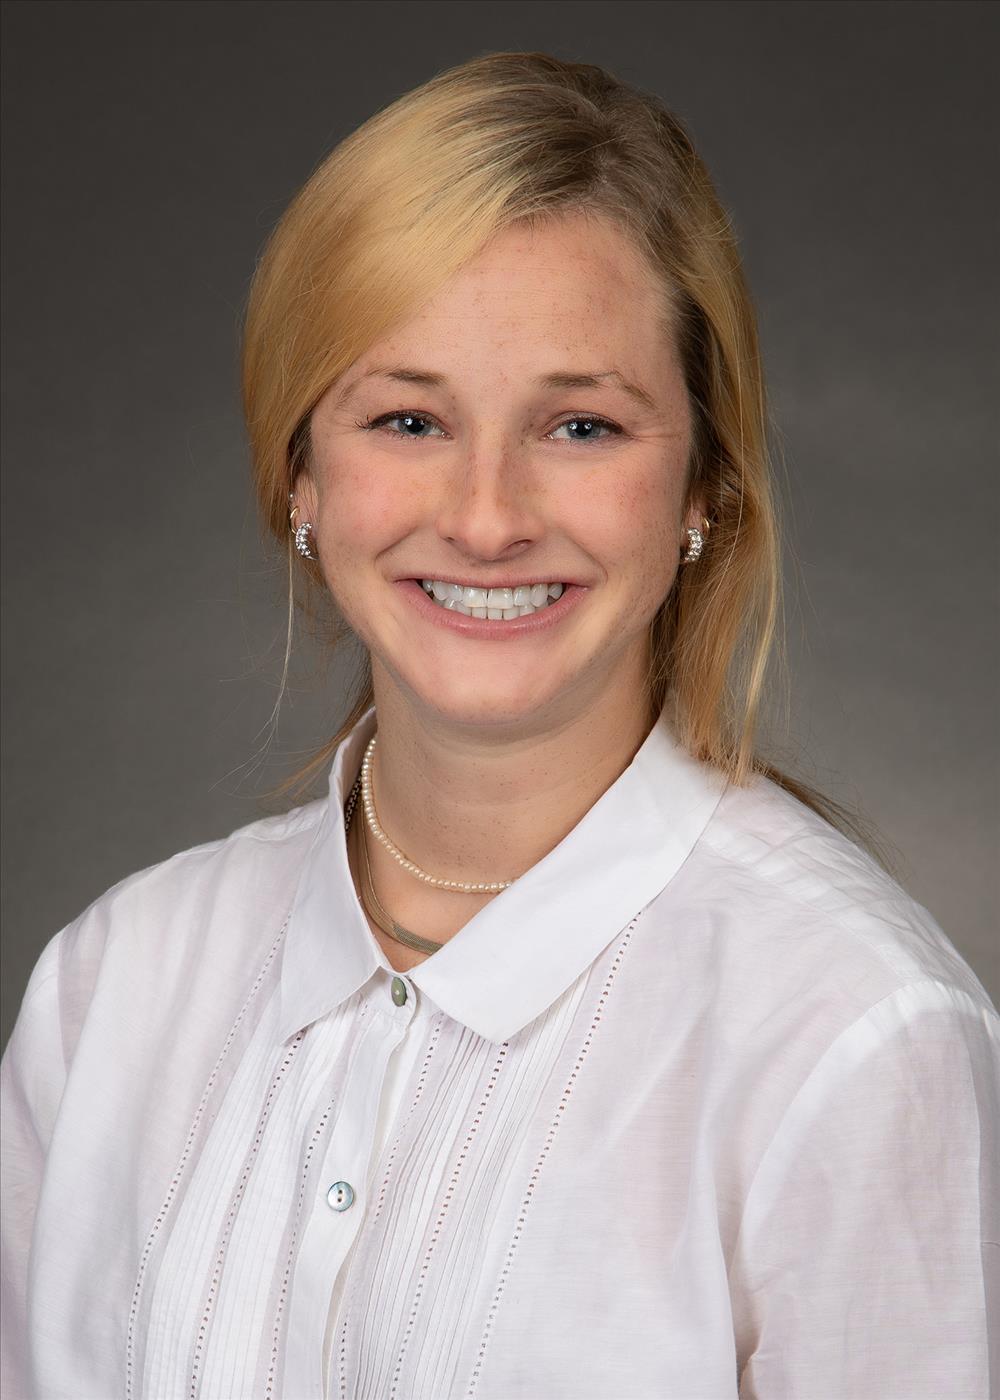 Colleen Cecola, MD